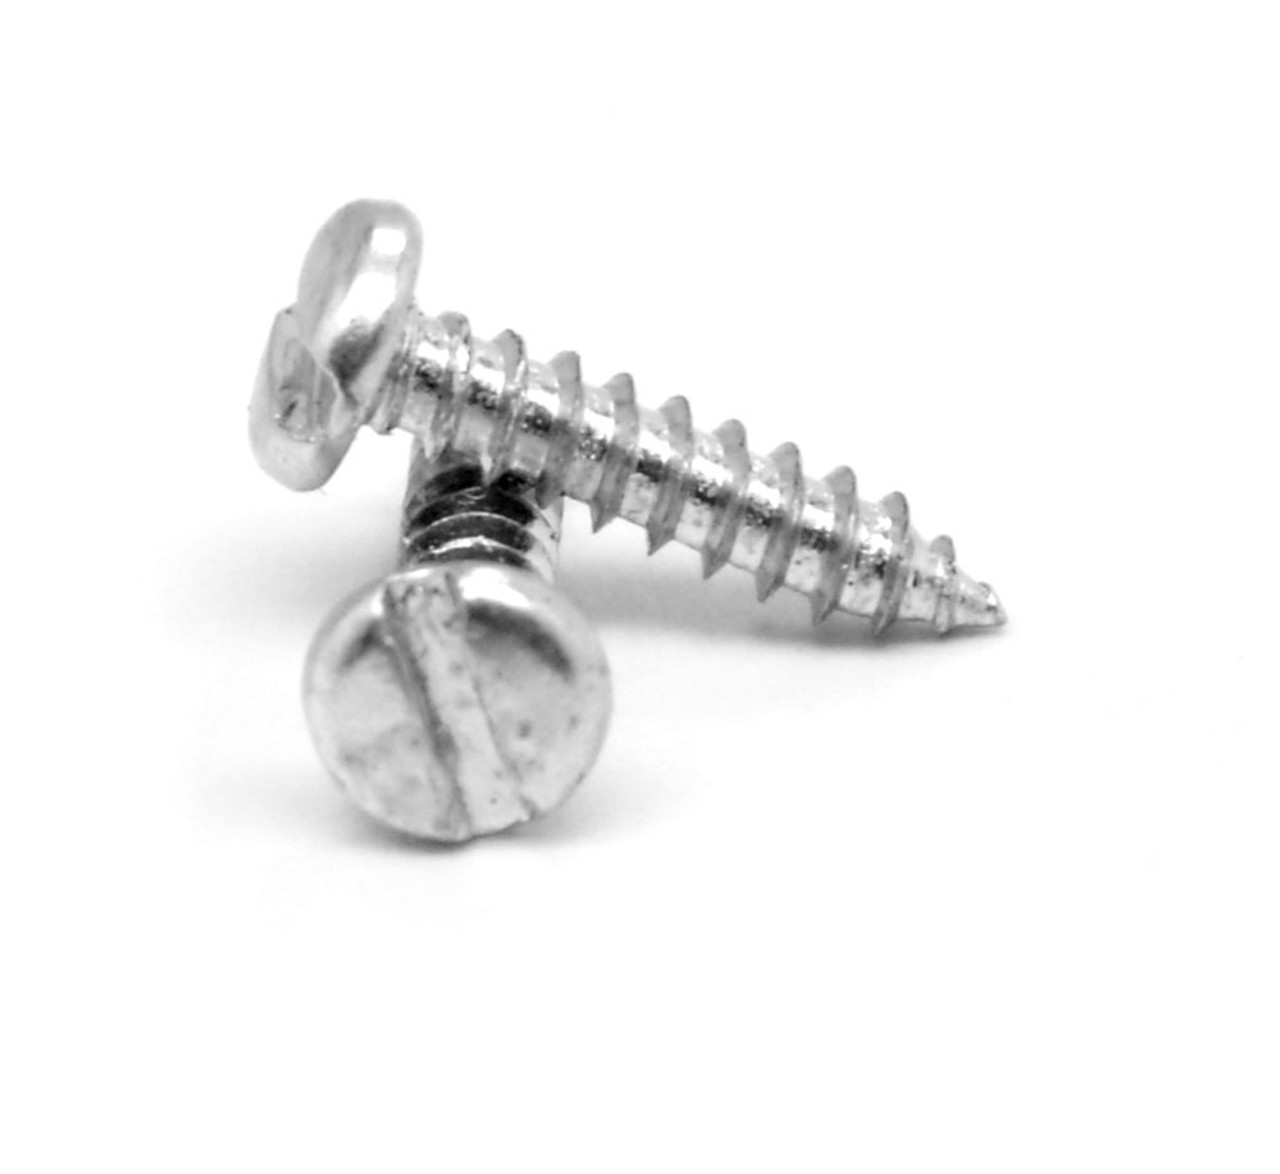 #10-12 x 1/2" Sheet Metal Screw Slotted Pan Head Type A Low Carbon Steel Zinc Plated